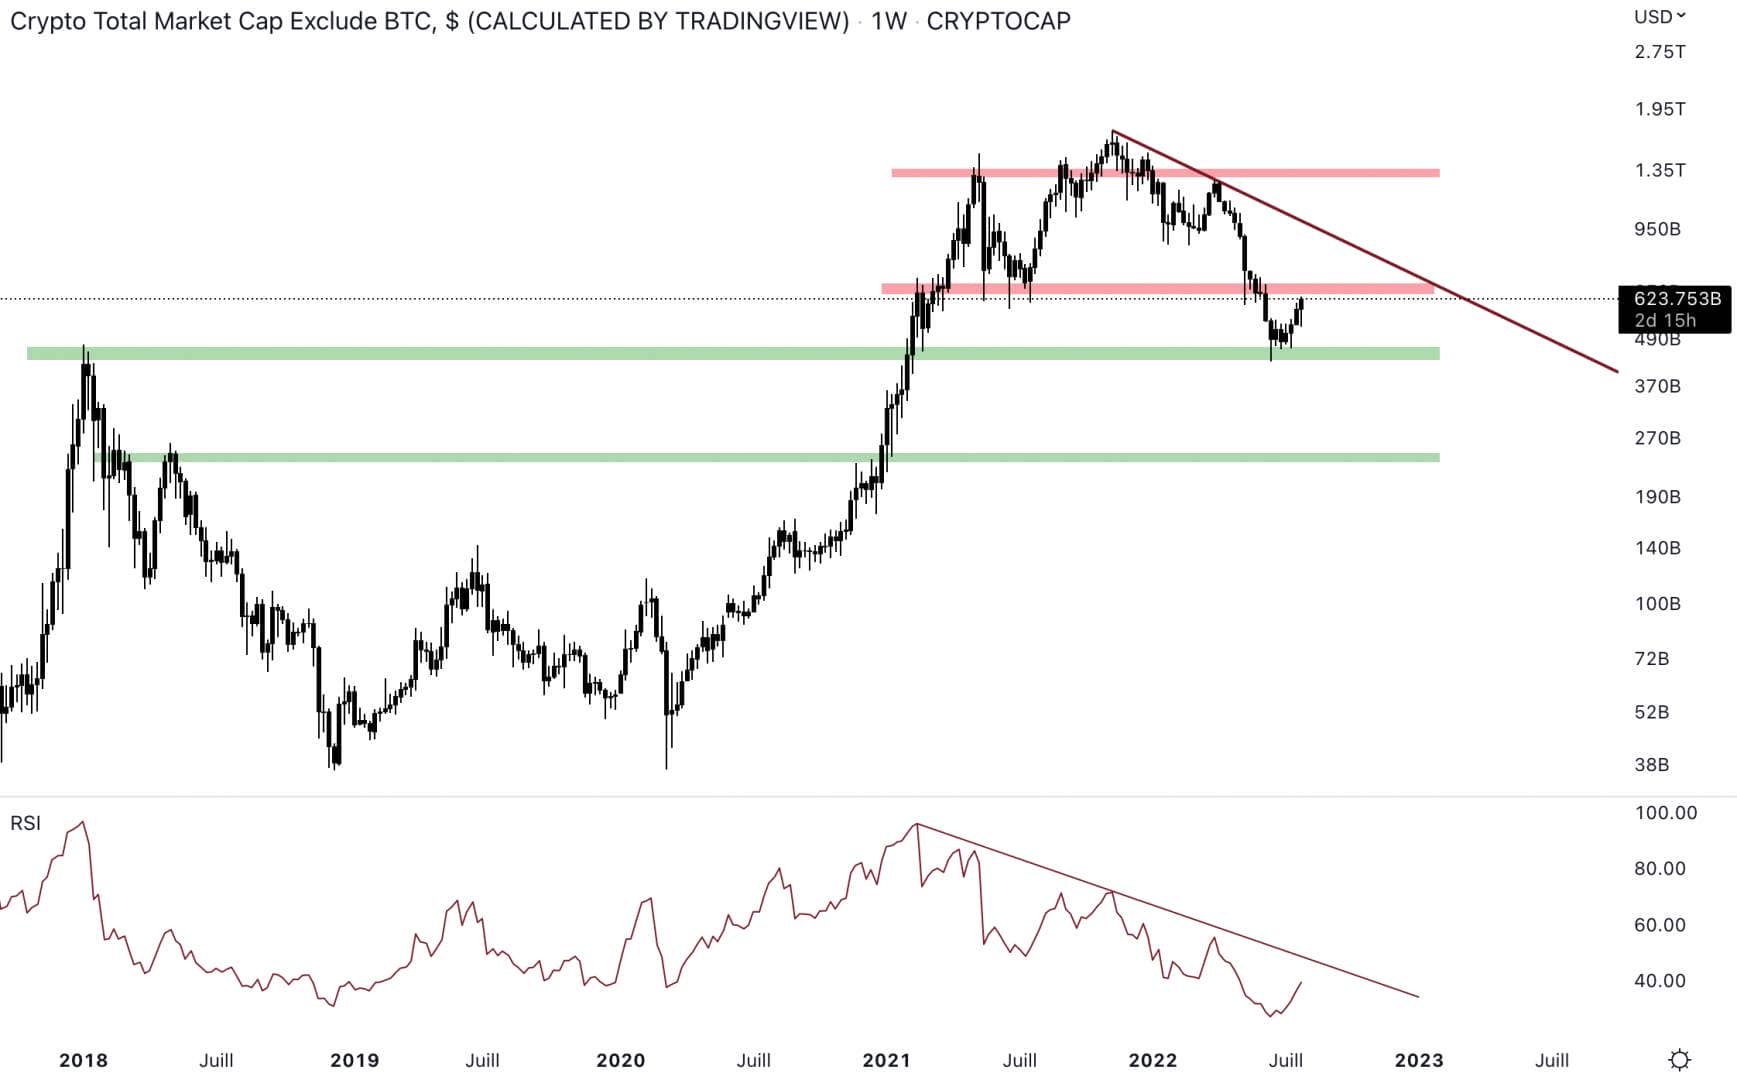 The capitalization of the altcoins is reaching the weekly resistance level.